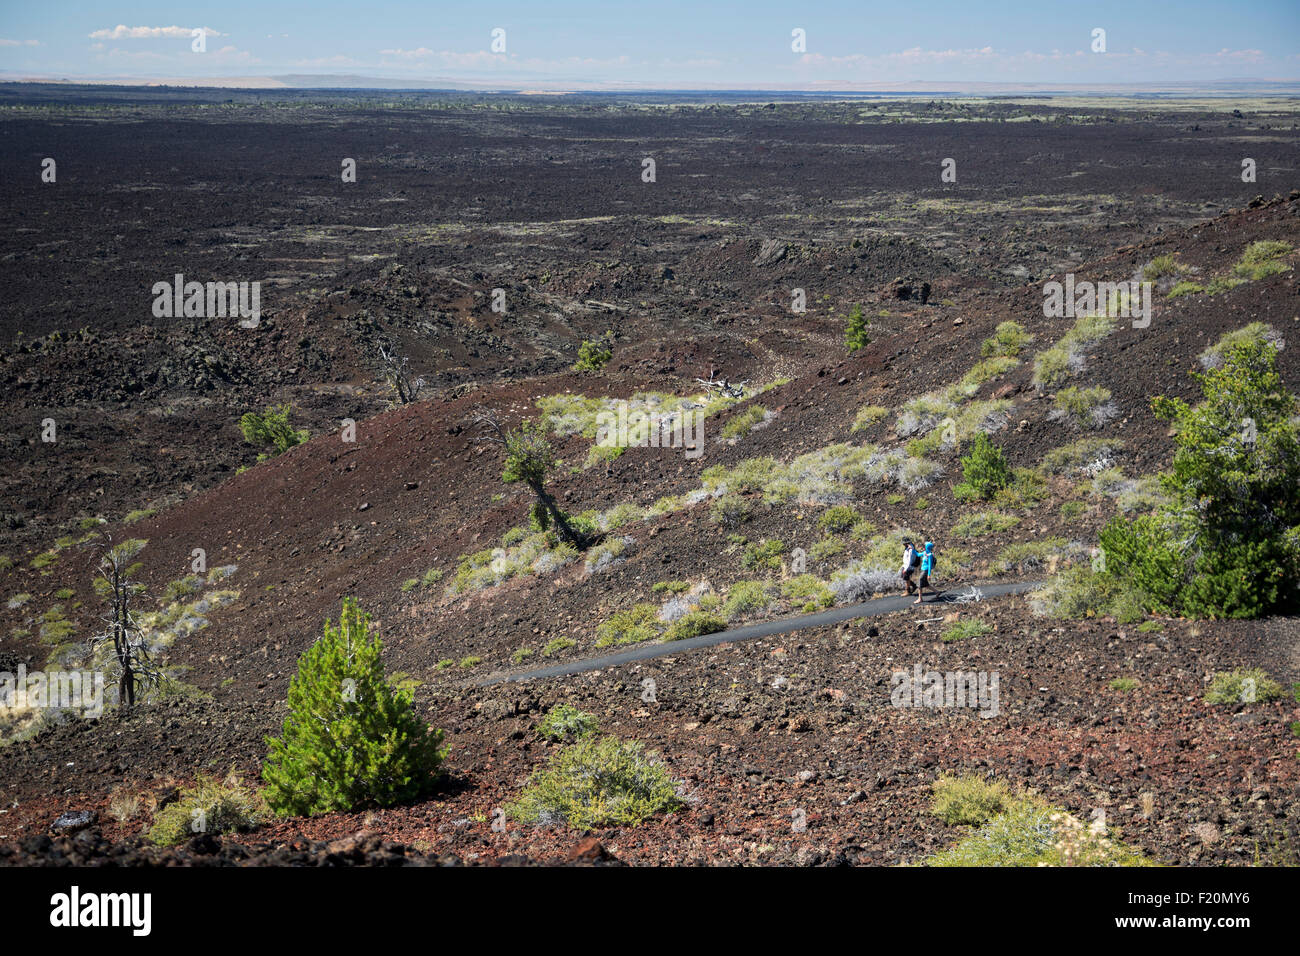 Arco, Idaho - Craters of the Moon National Monument. Stockfoto